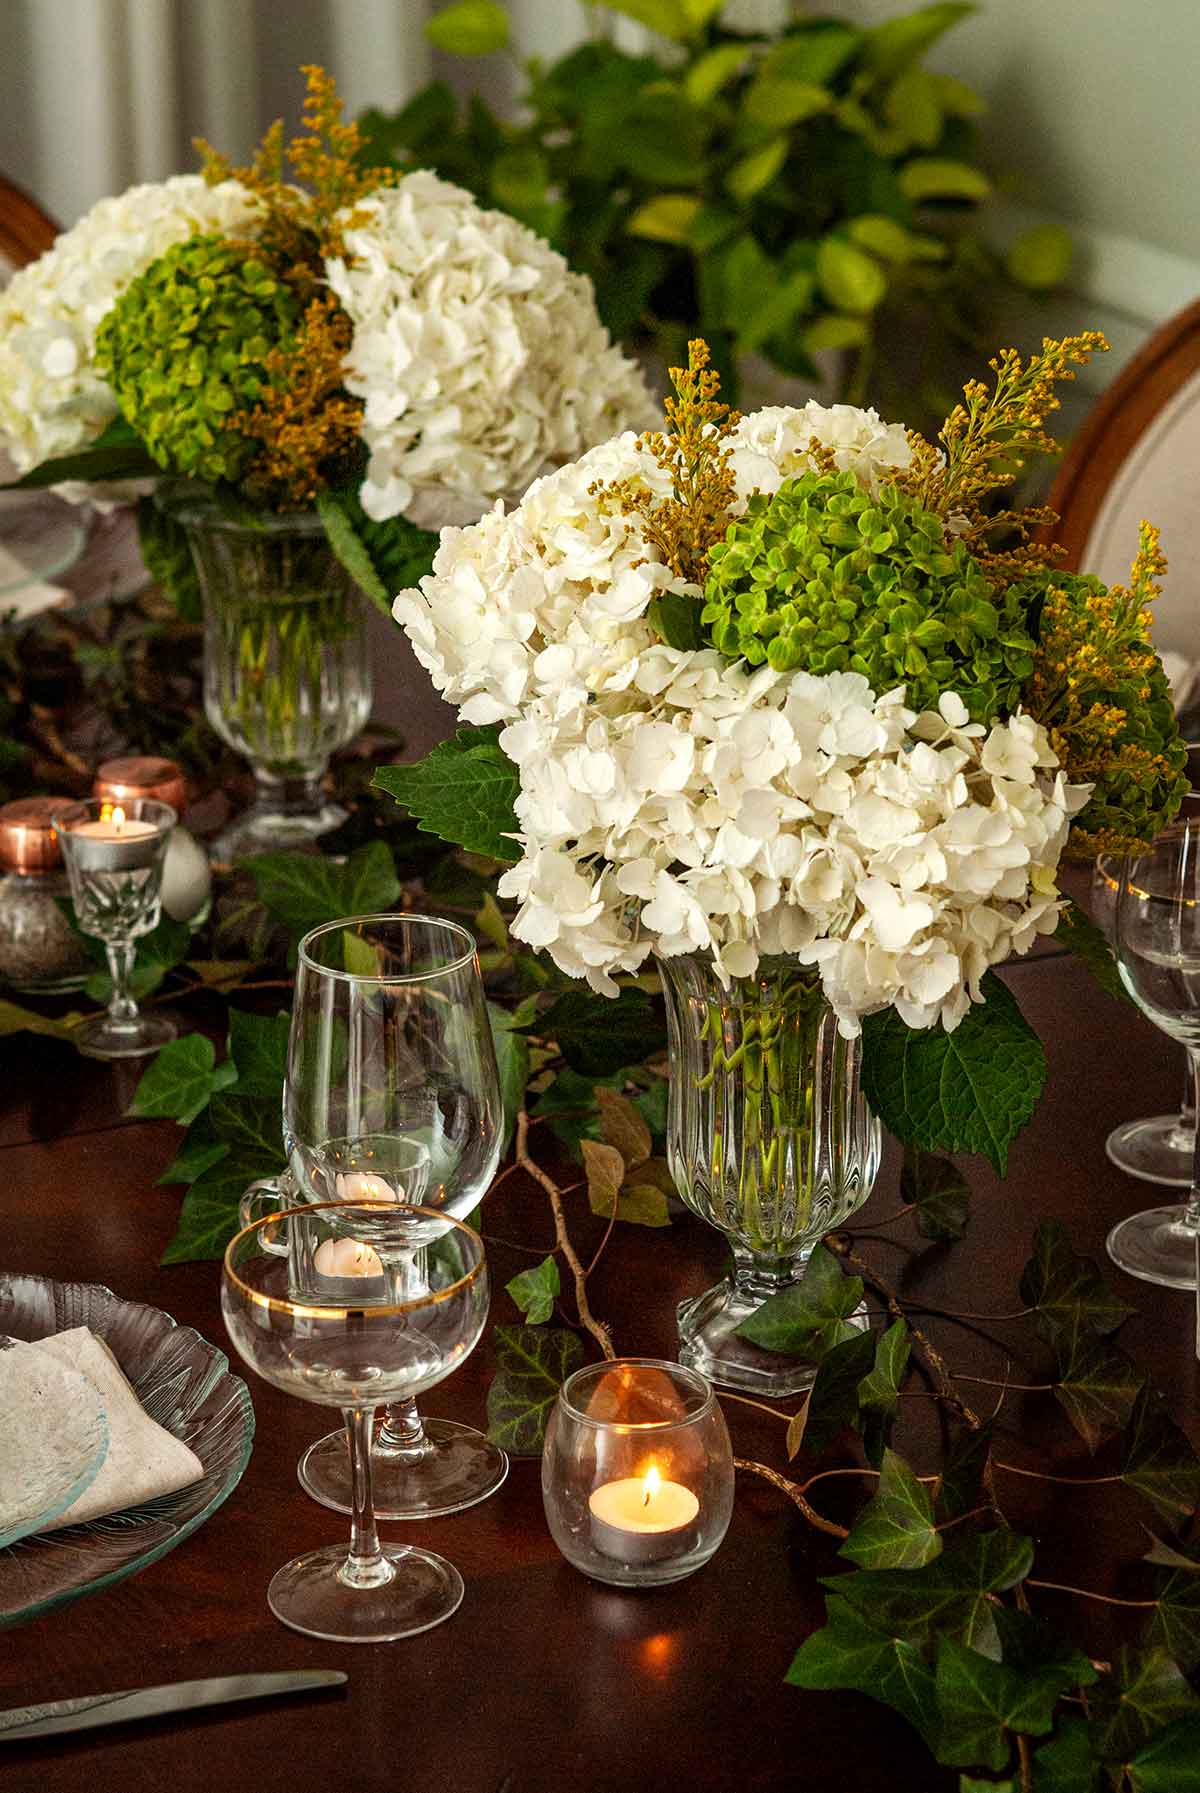 A table elegantly decorated with ivy, flowers, glassware and candles.